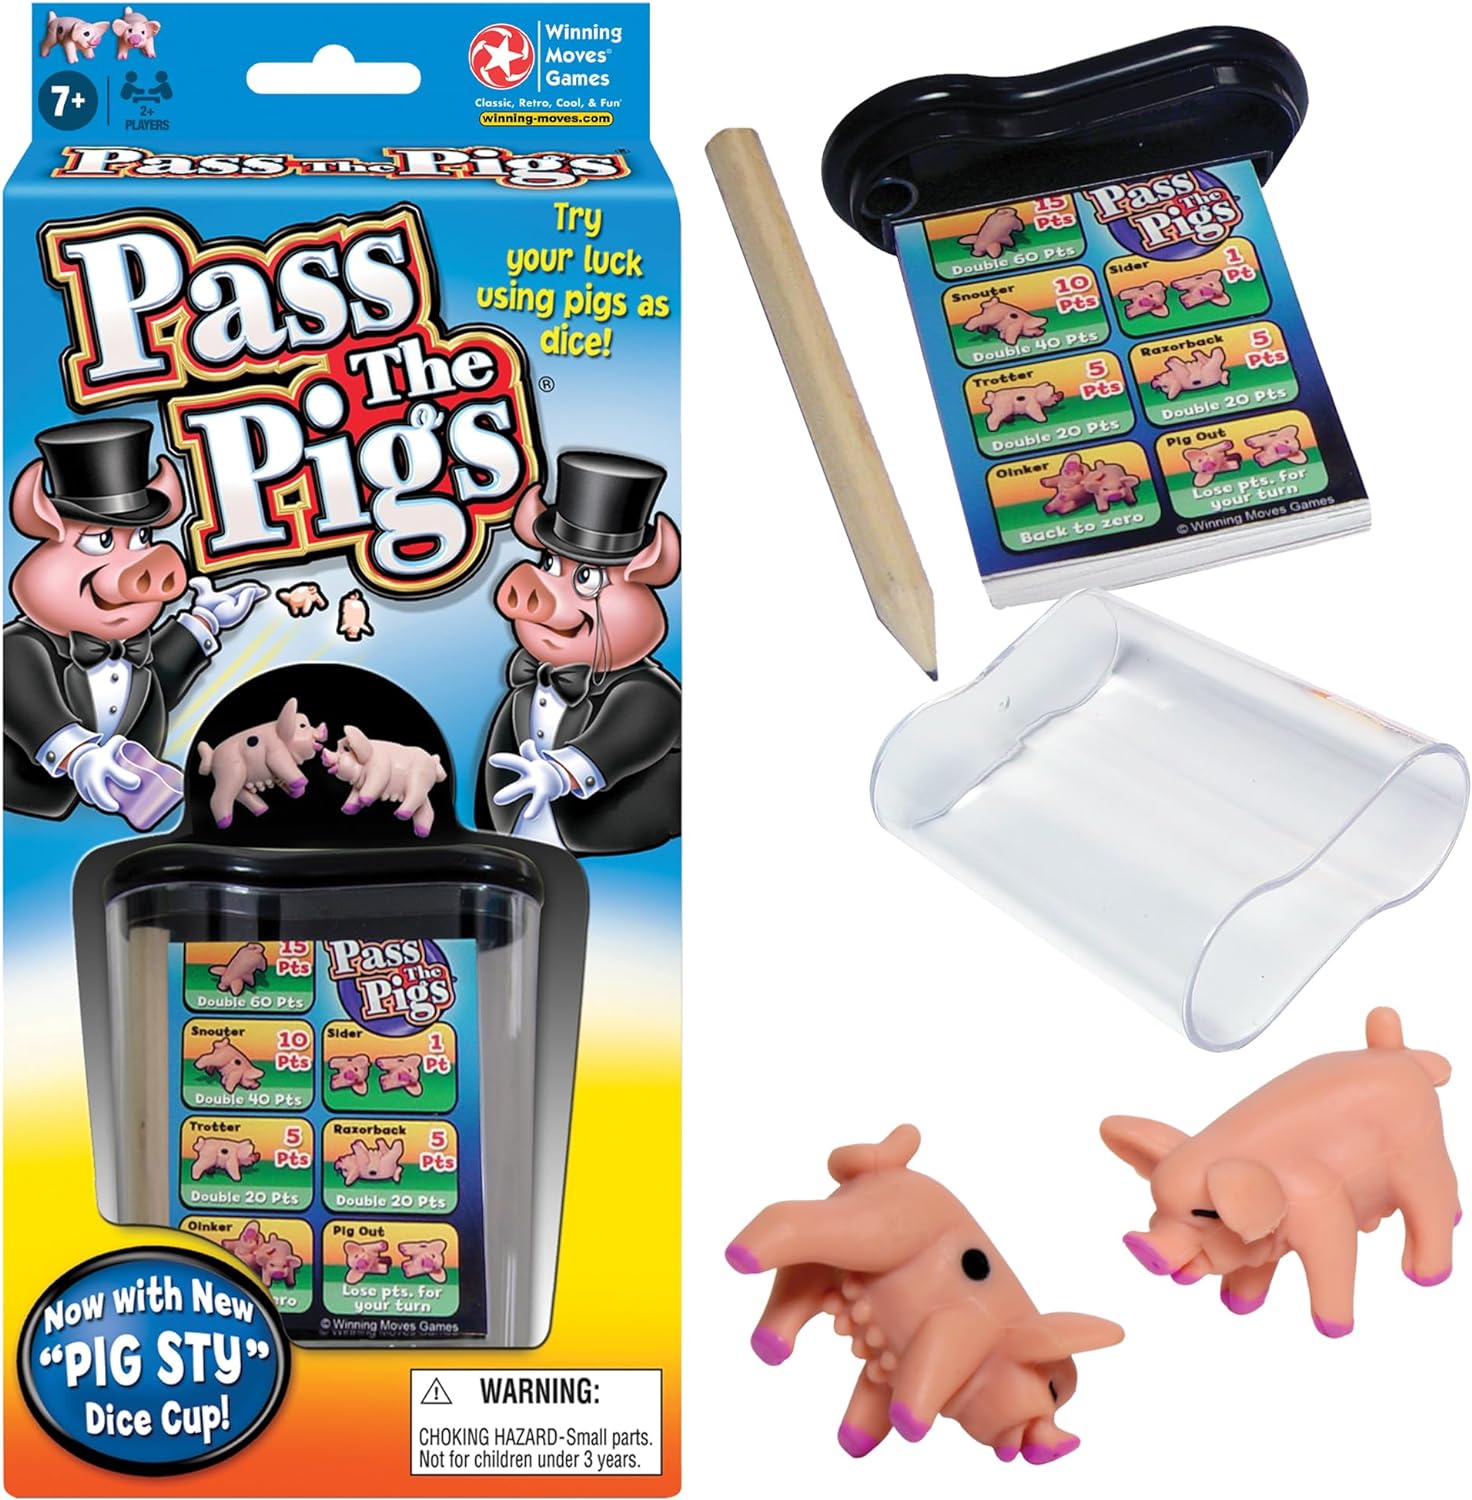 Pass The Pigs